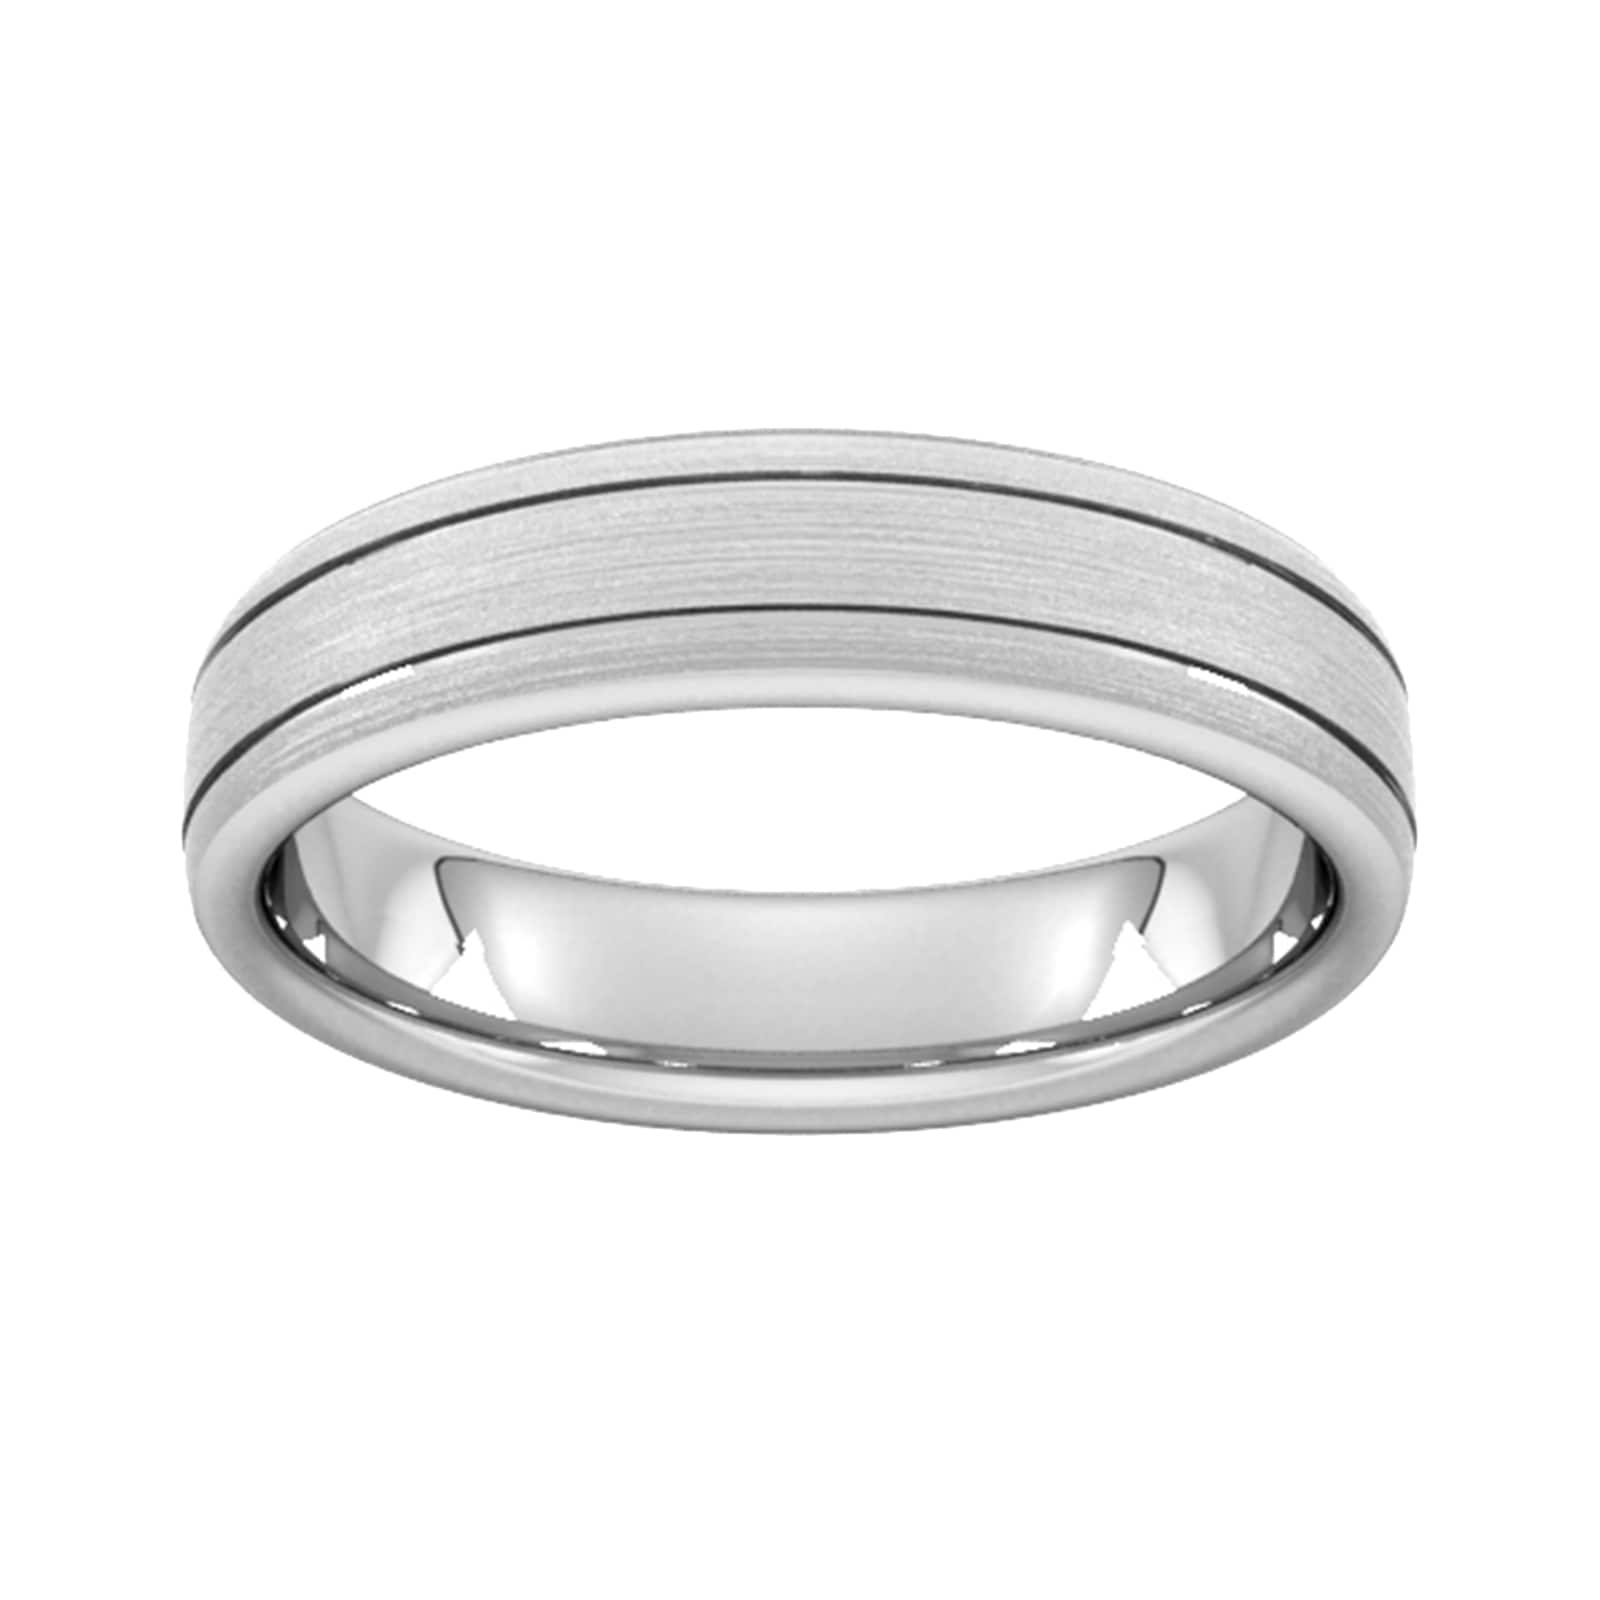 5mm Slight Court Standard Matt Finish With Double Grooves Wedding Ring In Platinum - Ring Size H